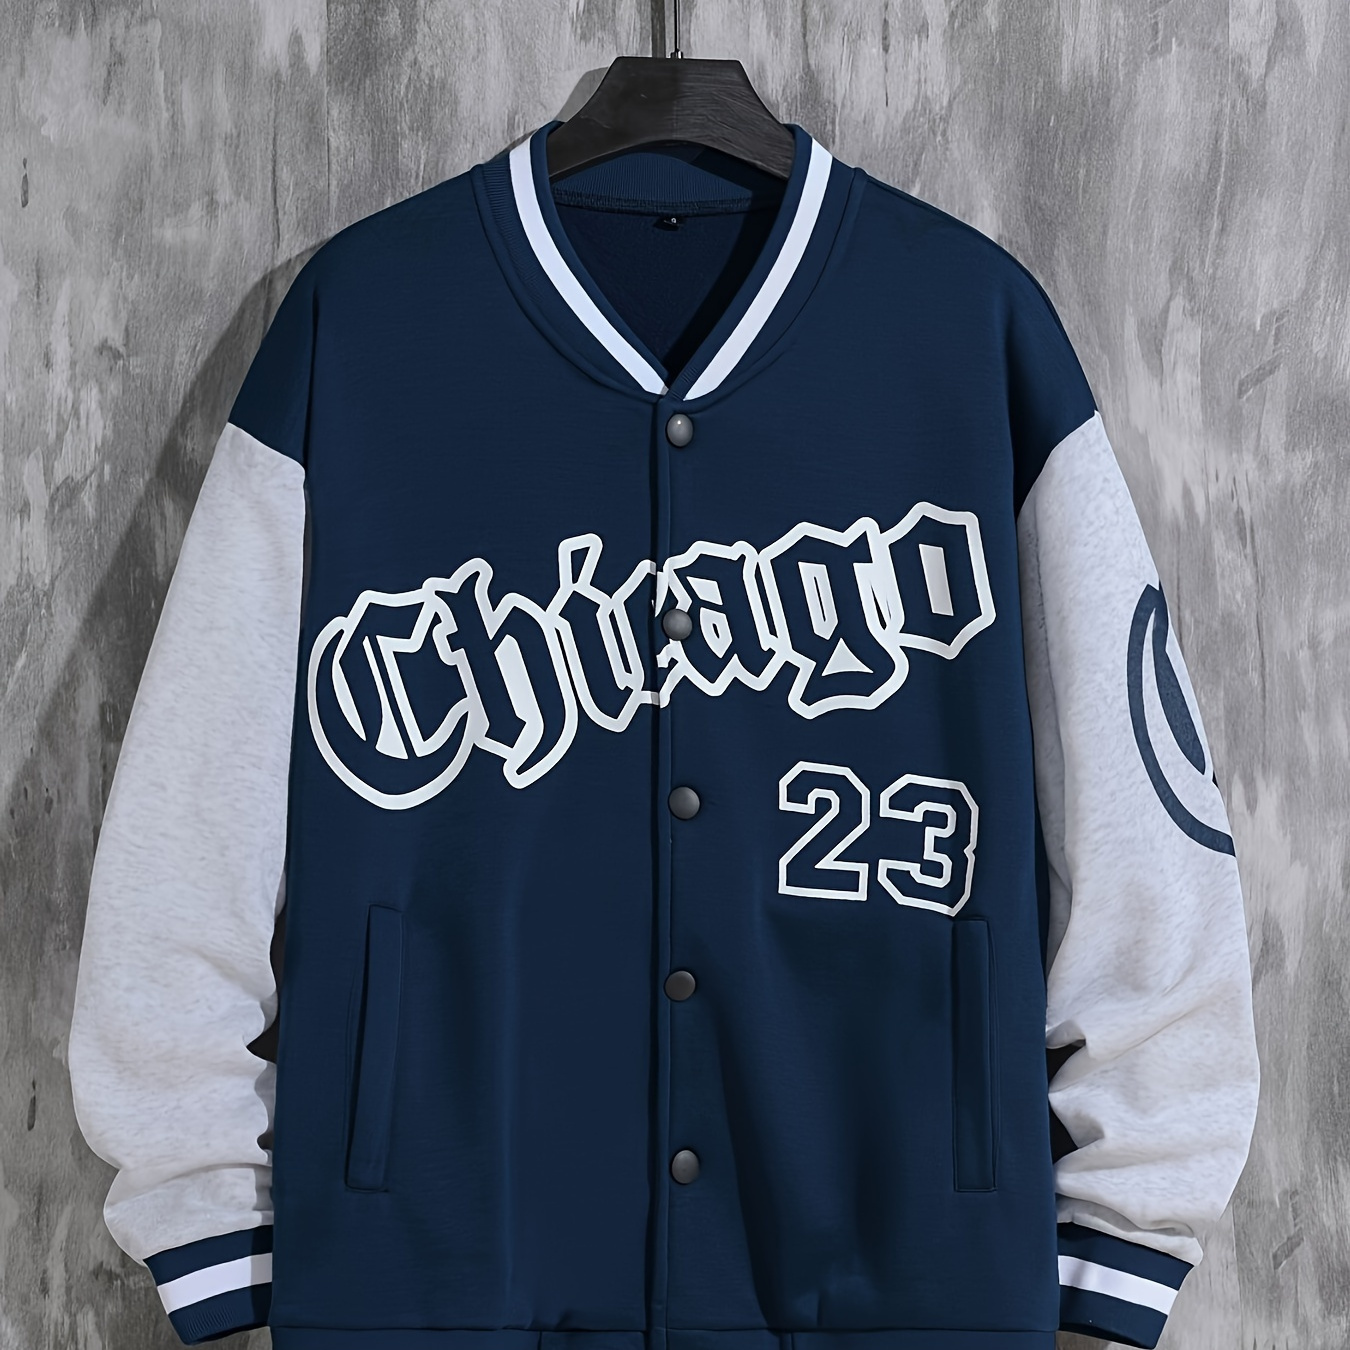 

Spring And Autumn Street Men's Fashion Trend Loose Casual Baseball Uniform Jacket, Suitable For Outdoor And Dating